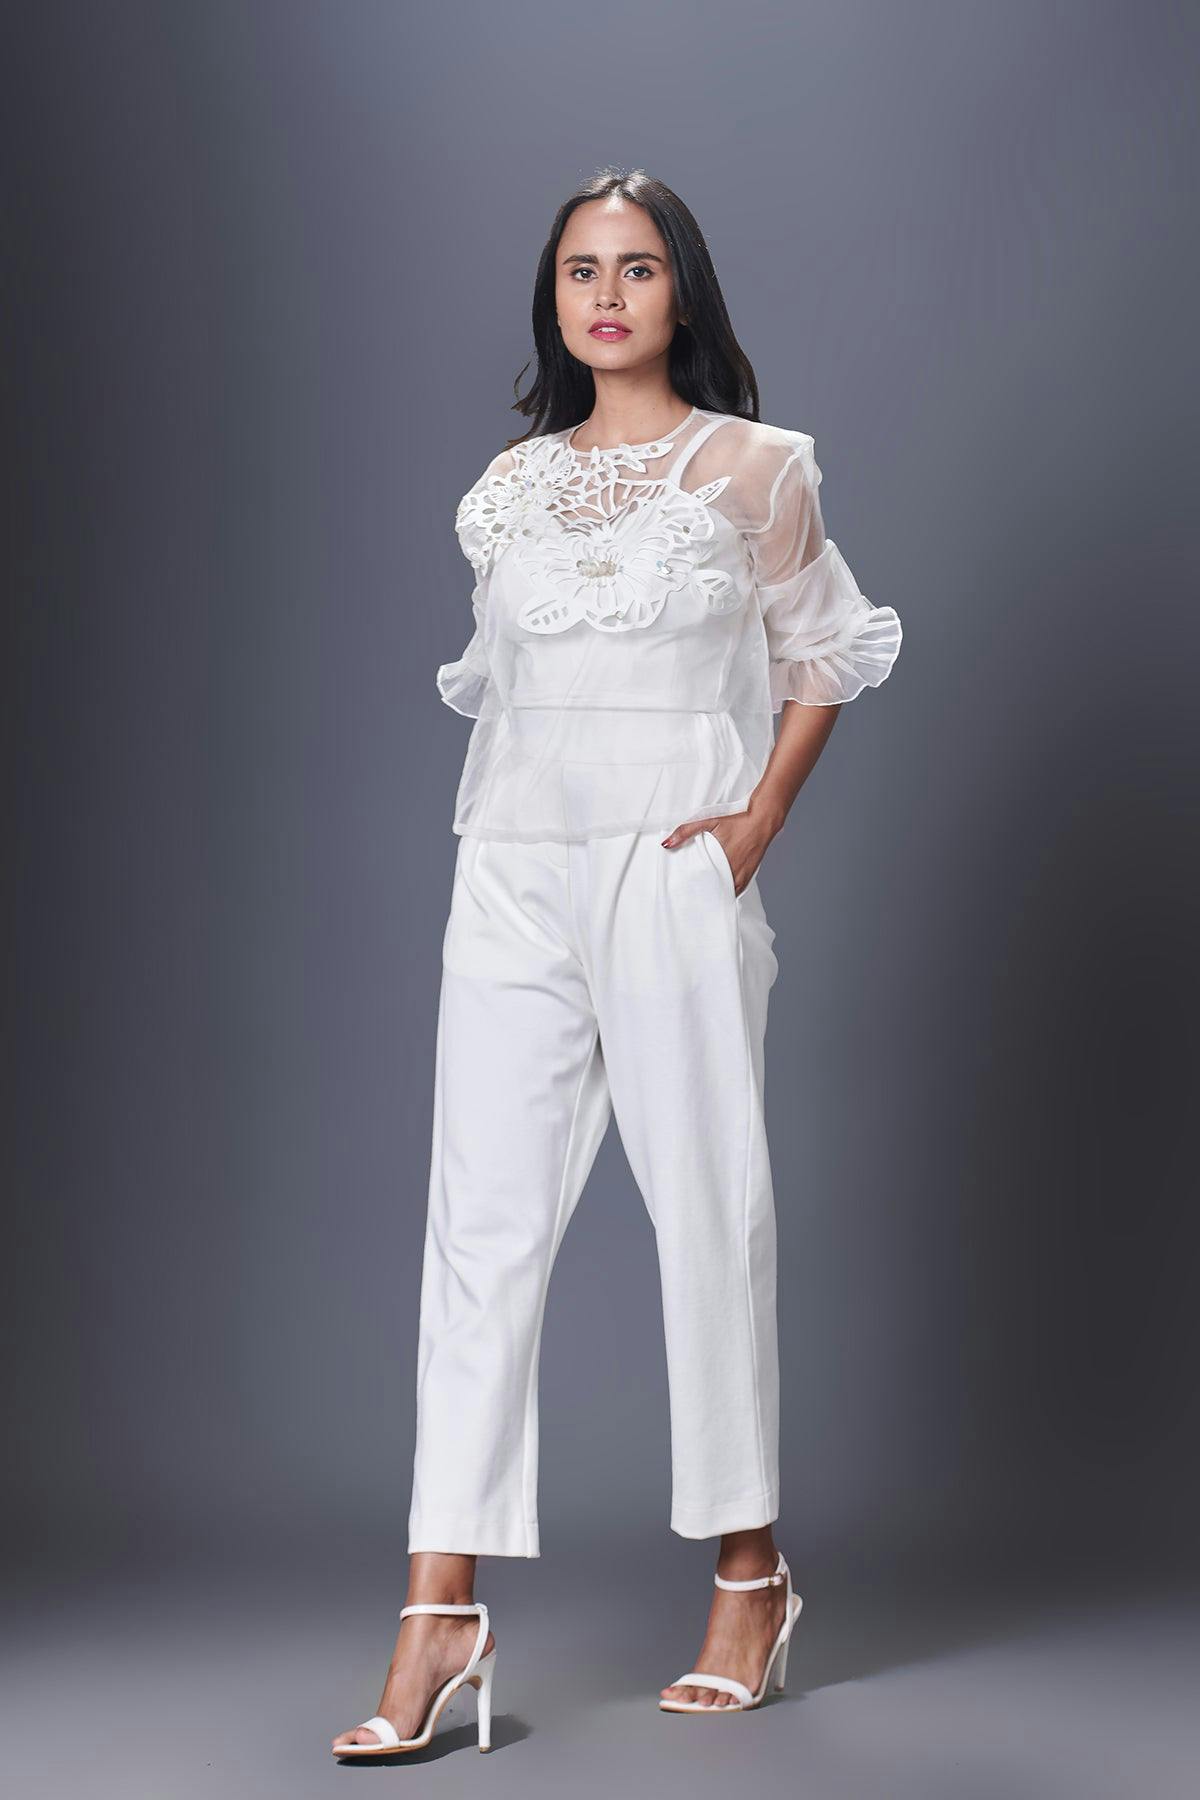 NN-1137-W - Organza Embroidered Top With Pants Set, a product by Deepika Arora